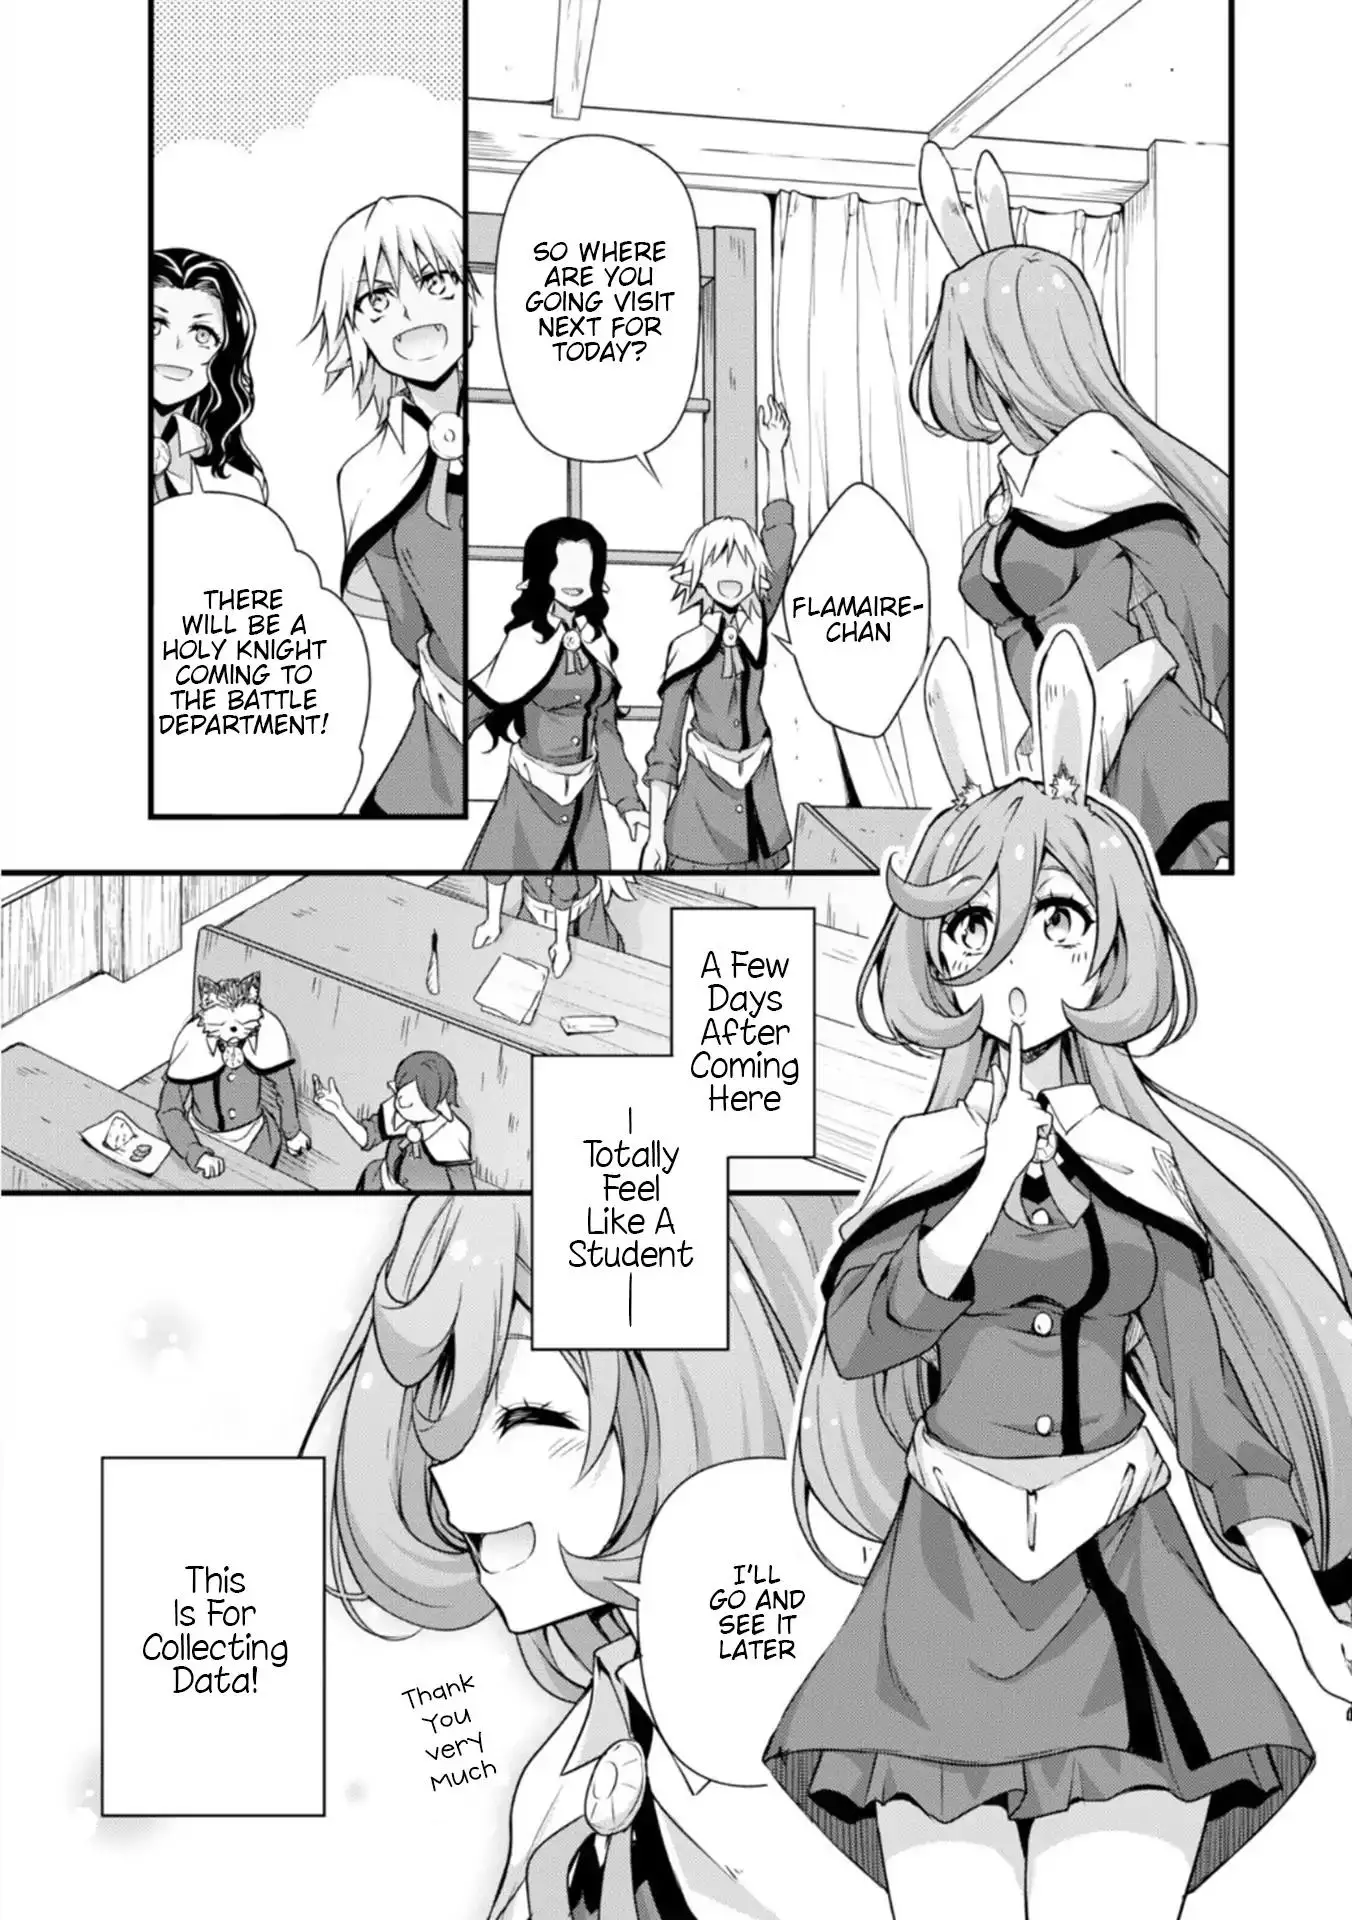 Tensei Shitara Slime Datta Ken: The Ways of Strolling in the Demon Country - 20 page 2